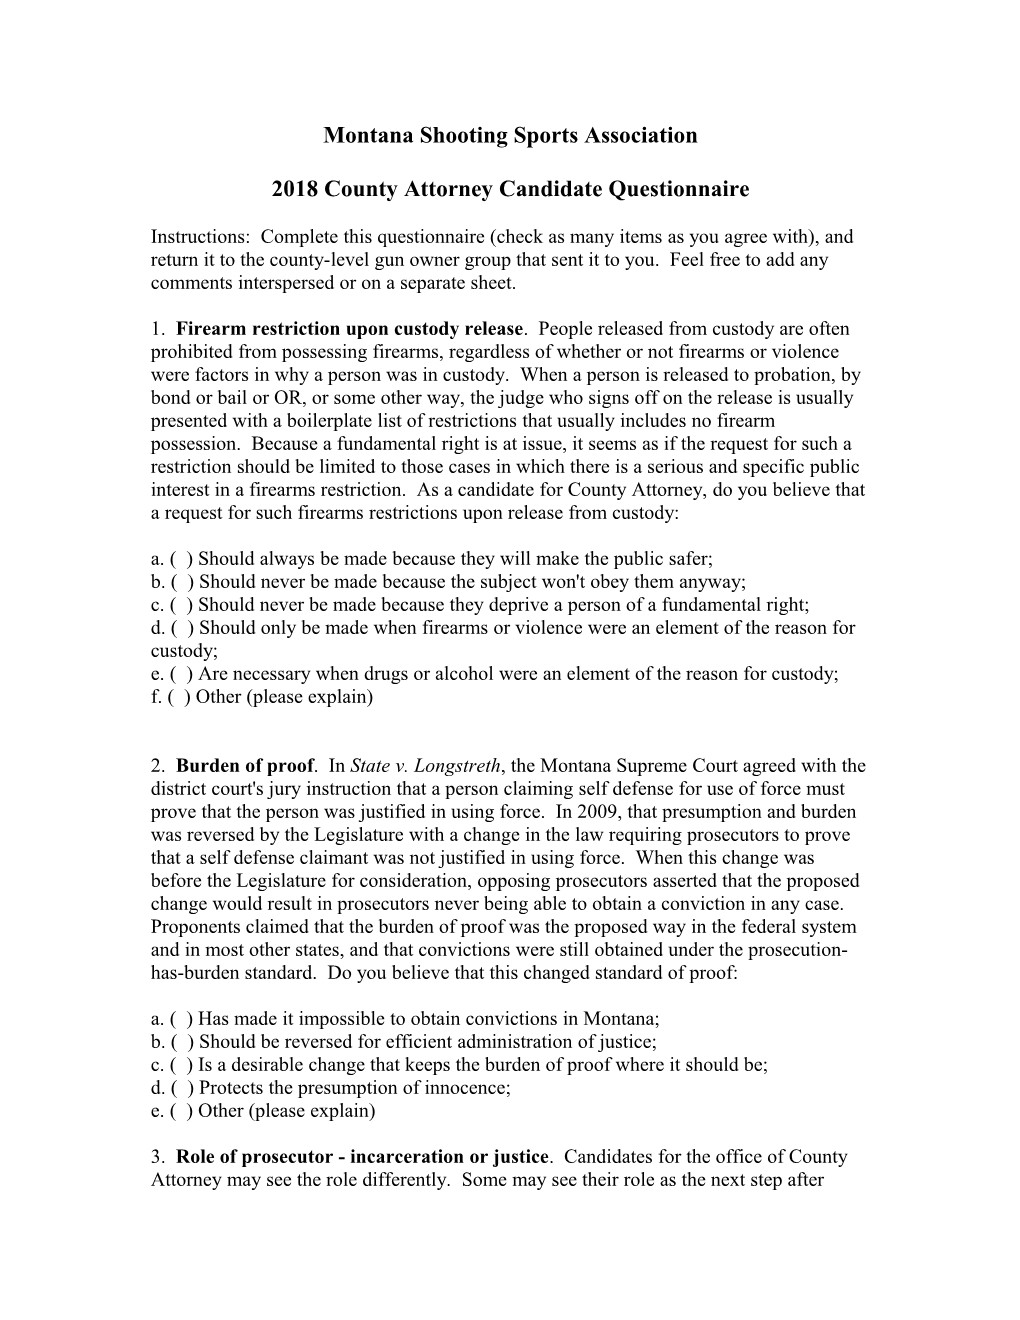 County Attorney Candidate Questionnaire